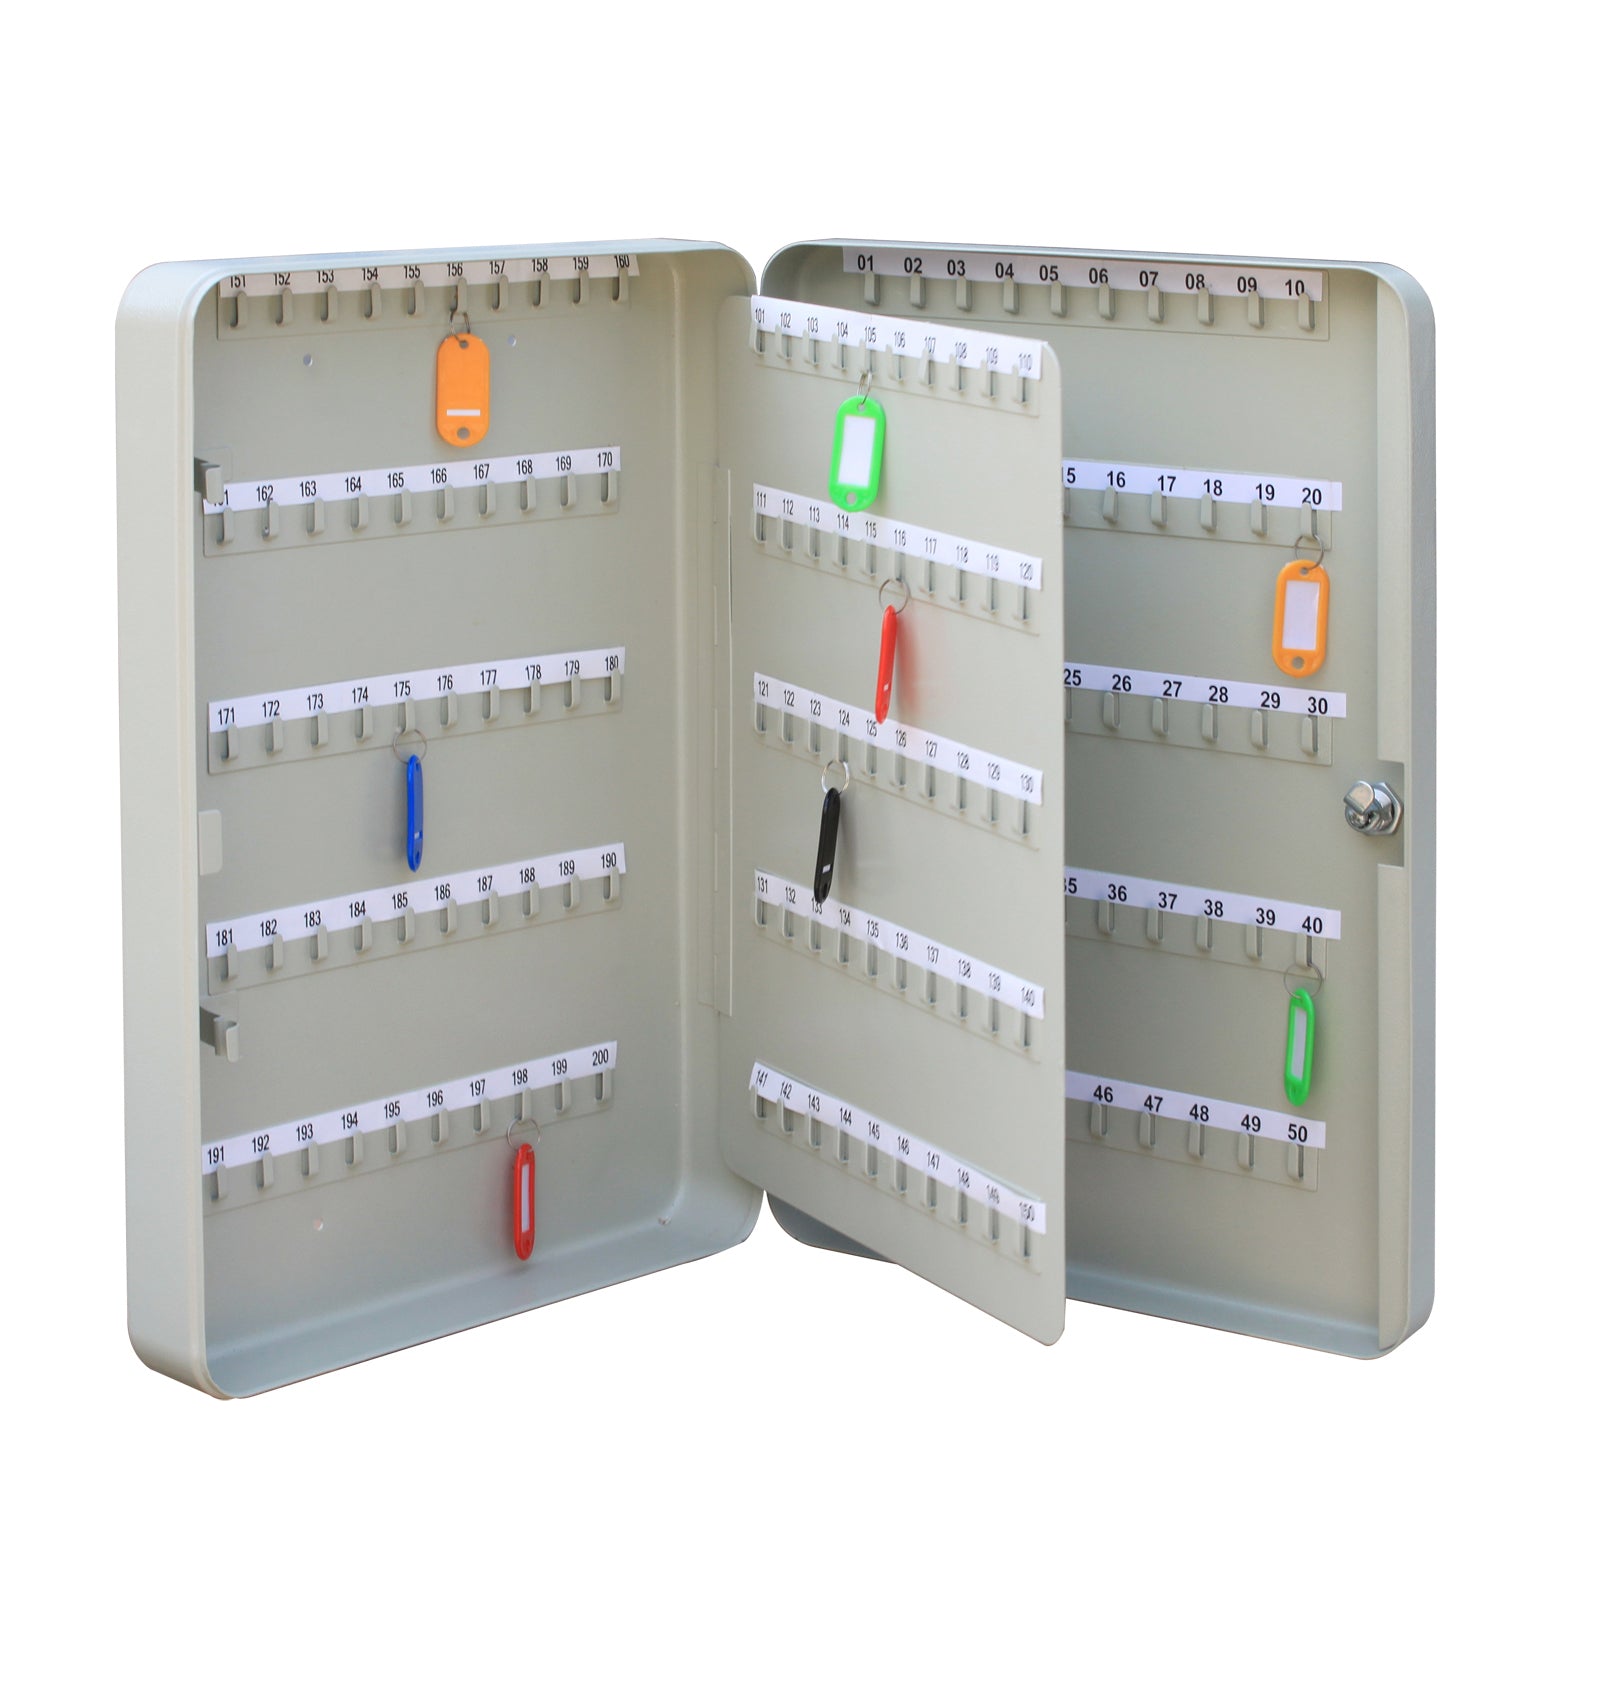 This image shows an open grey key cabinet with numbered hooks and colored key tags. The door on the left hand side displays numbers ranging from 151 to 200, while the centre panel is numbered 51 to 150 and the right side shows 1 to 50, indicating a large capacity for key organization. Each hook has a white label with black numbering, and the key tags are in bright colors like orange, green, red, and blue for easy identification.